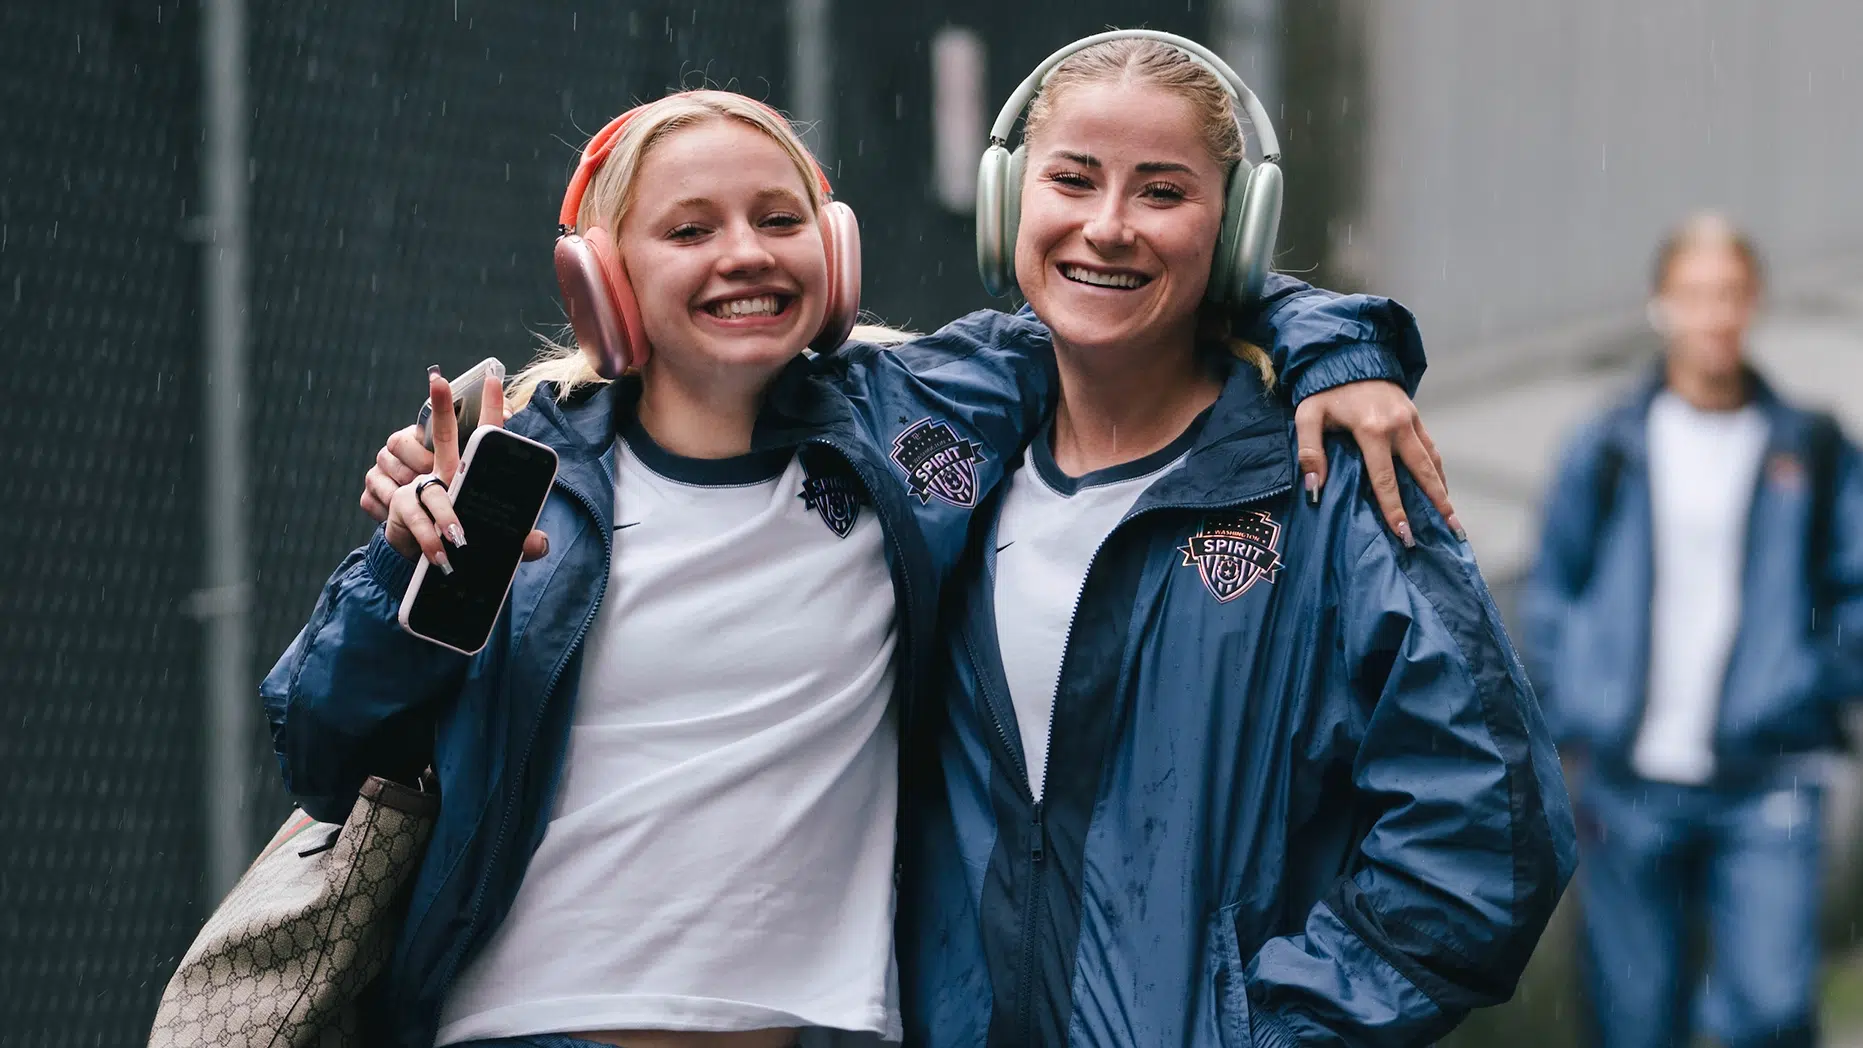 Chloe Ricketts and Heather Stainbrook in matching steel blue sweats and Apple headphones.